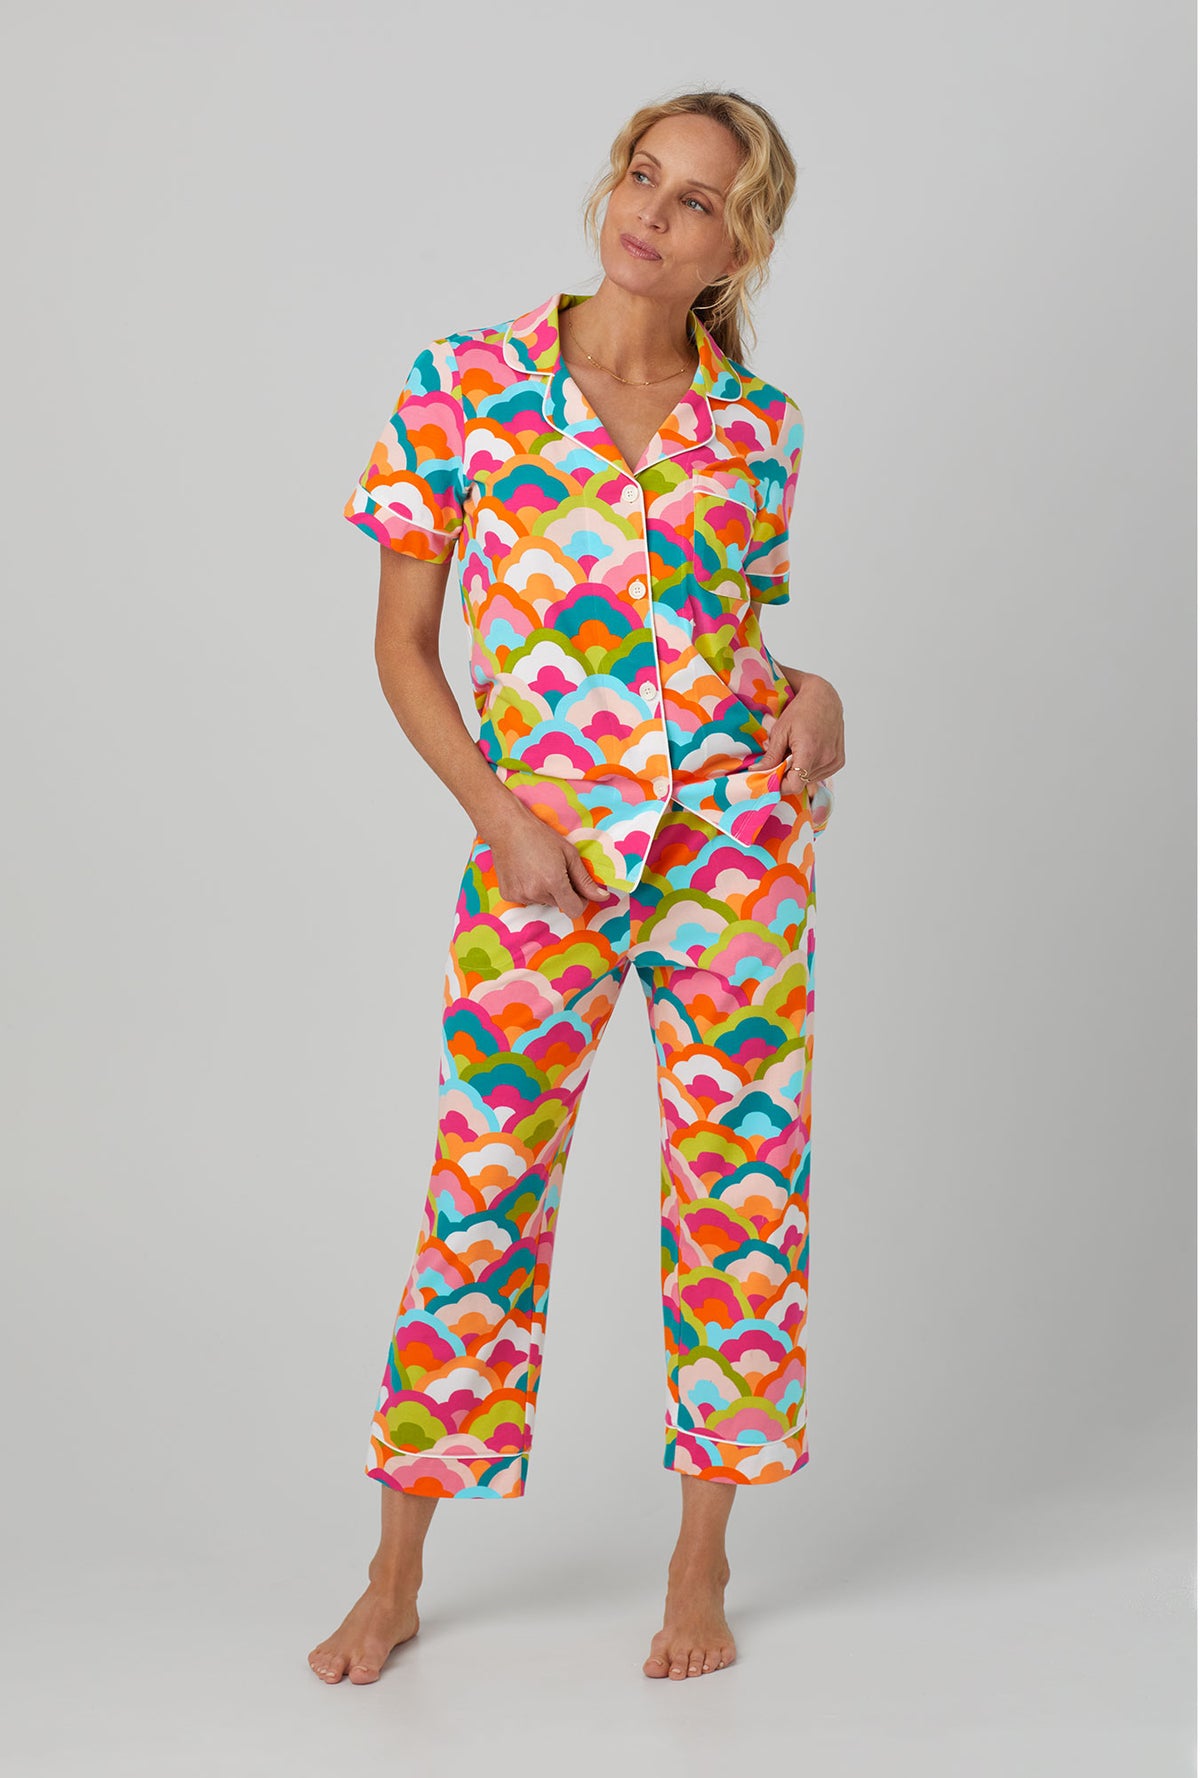 A lady wearing Short Sleeve Classic Stretch Jersey Cropped PJ Set with Rainbow Cloud print